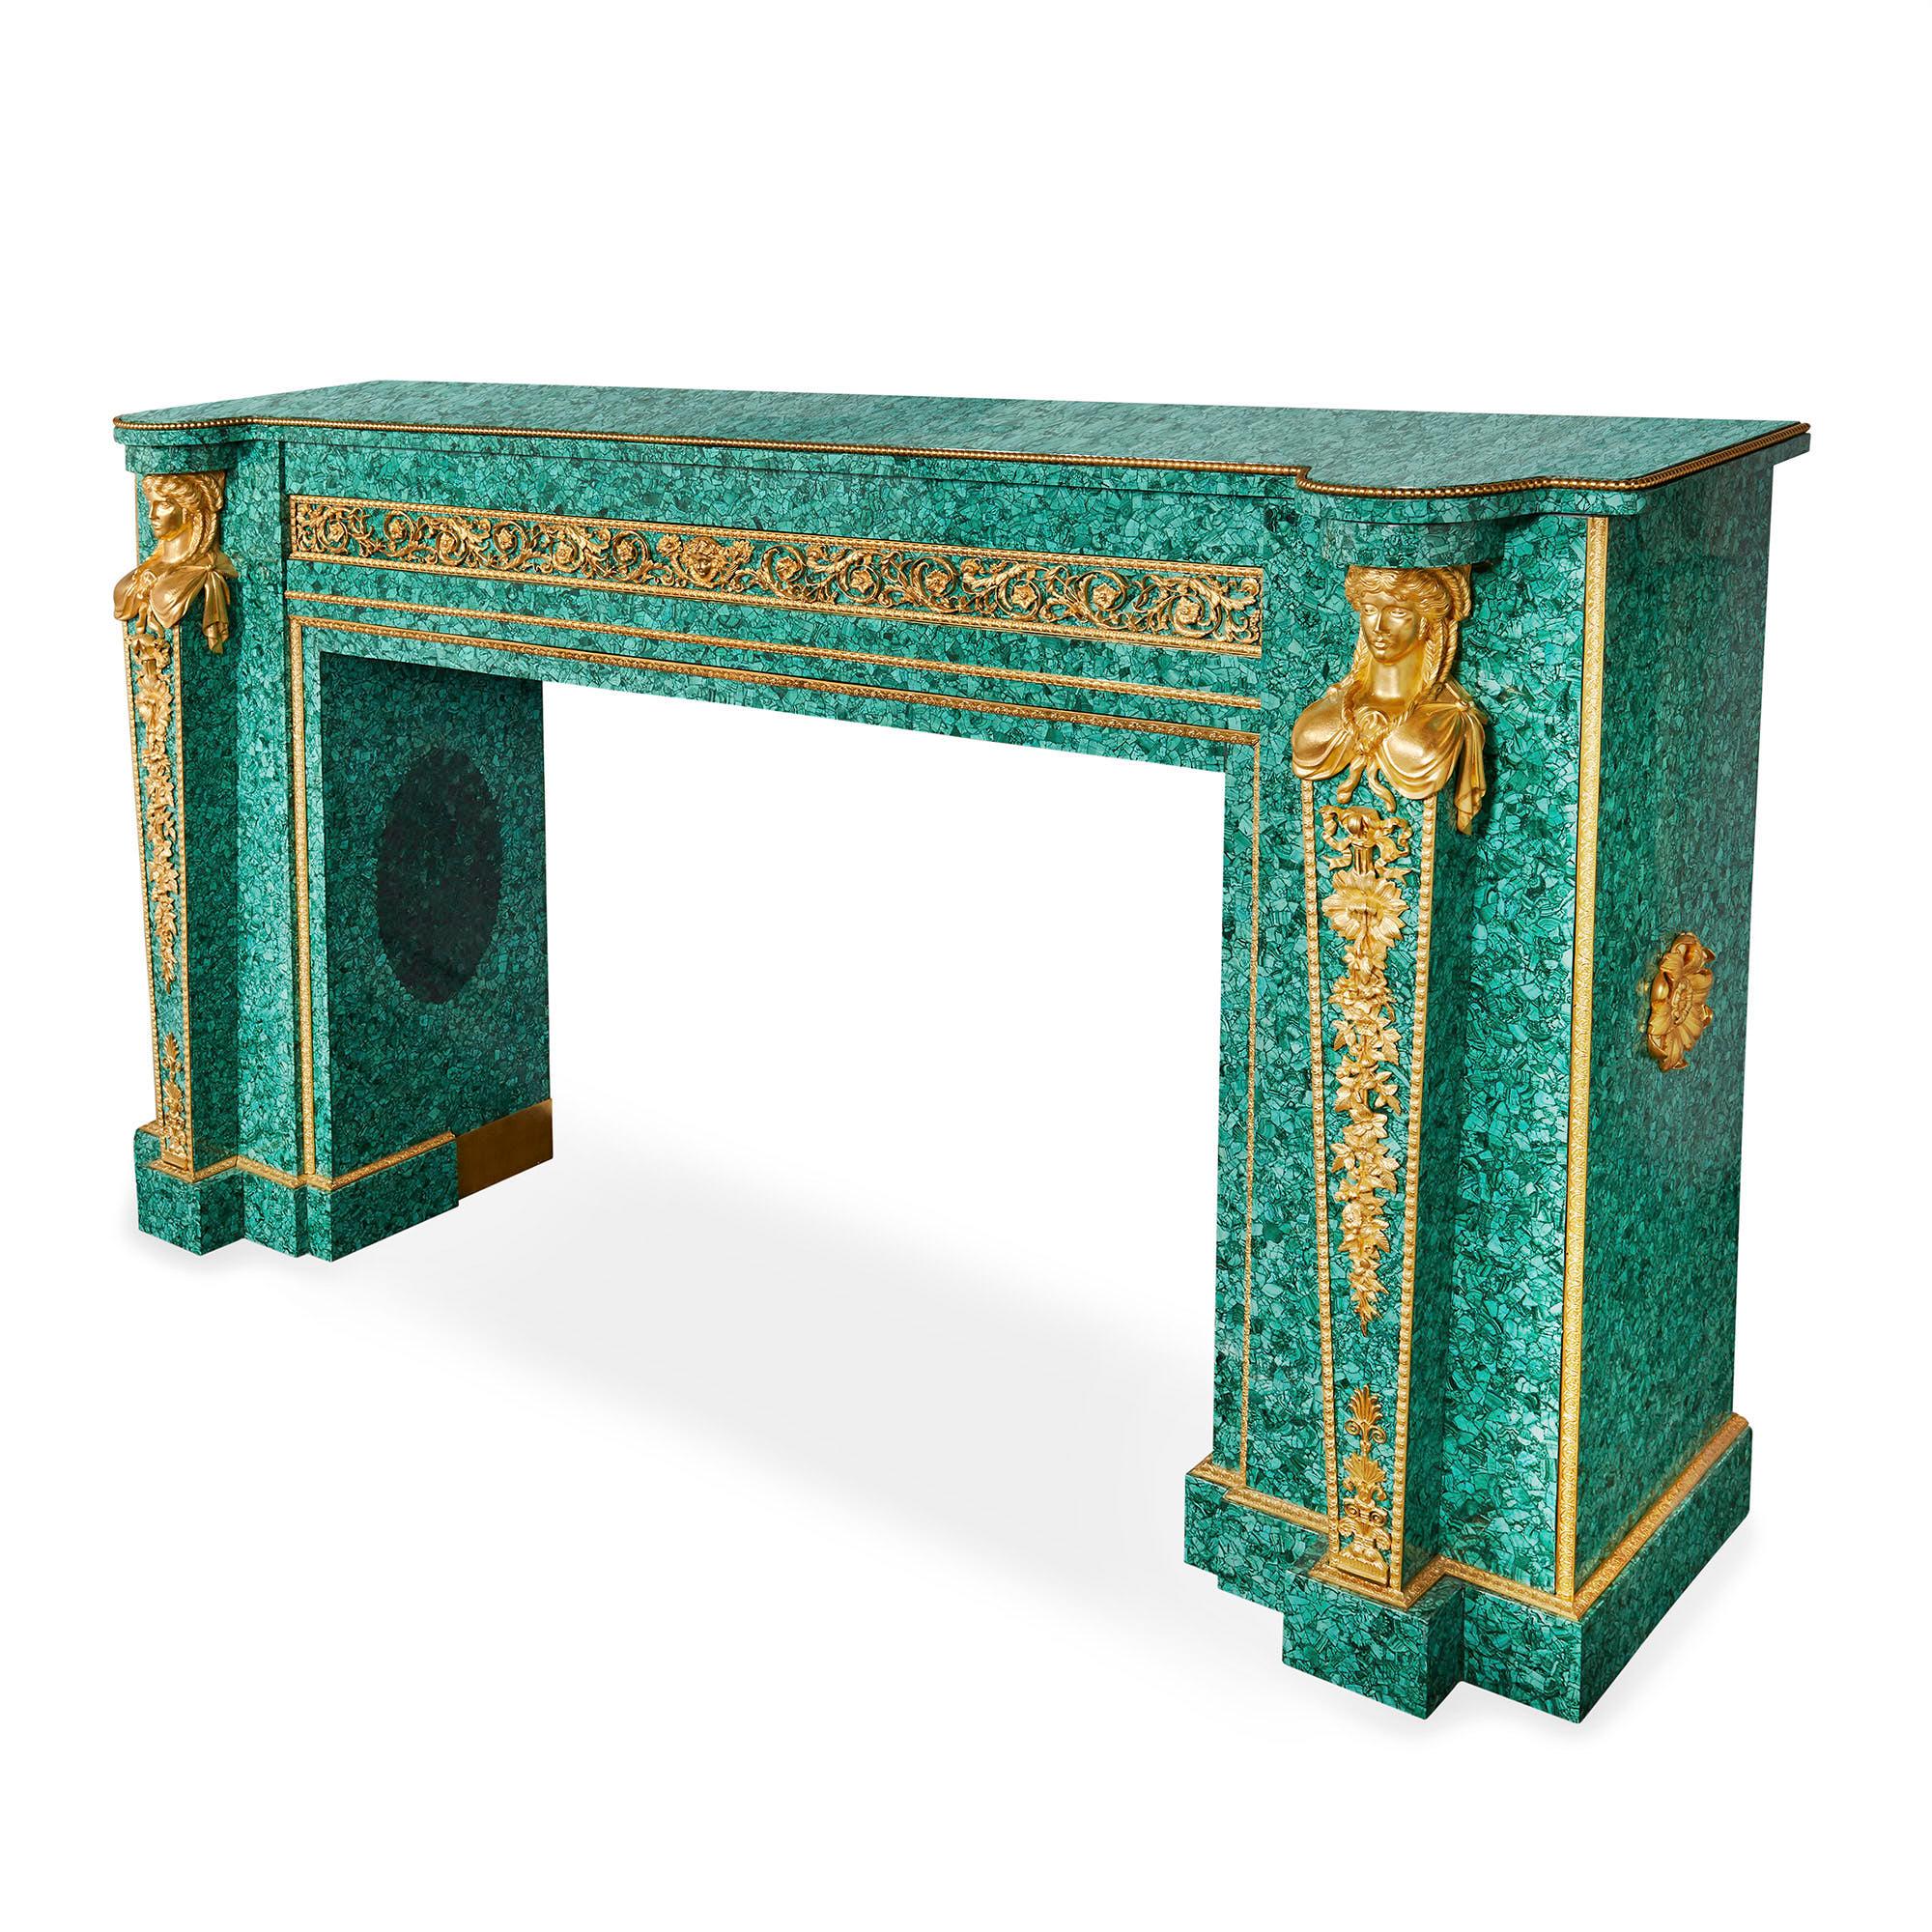 Large Neoclassical style gilt bronze and malachite fireplace
French, 20th century
Measures: Height 124cm, width 218cm, depth 58cm

Crafted from the timeless combination of malachite and gilt bronze, this monumental fireplace is a striking expression